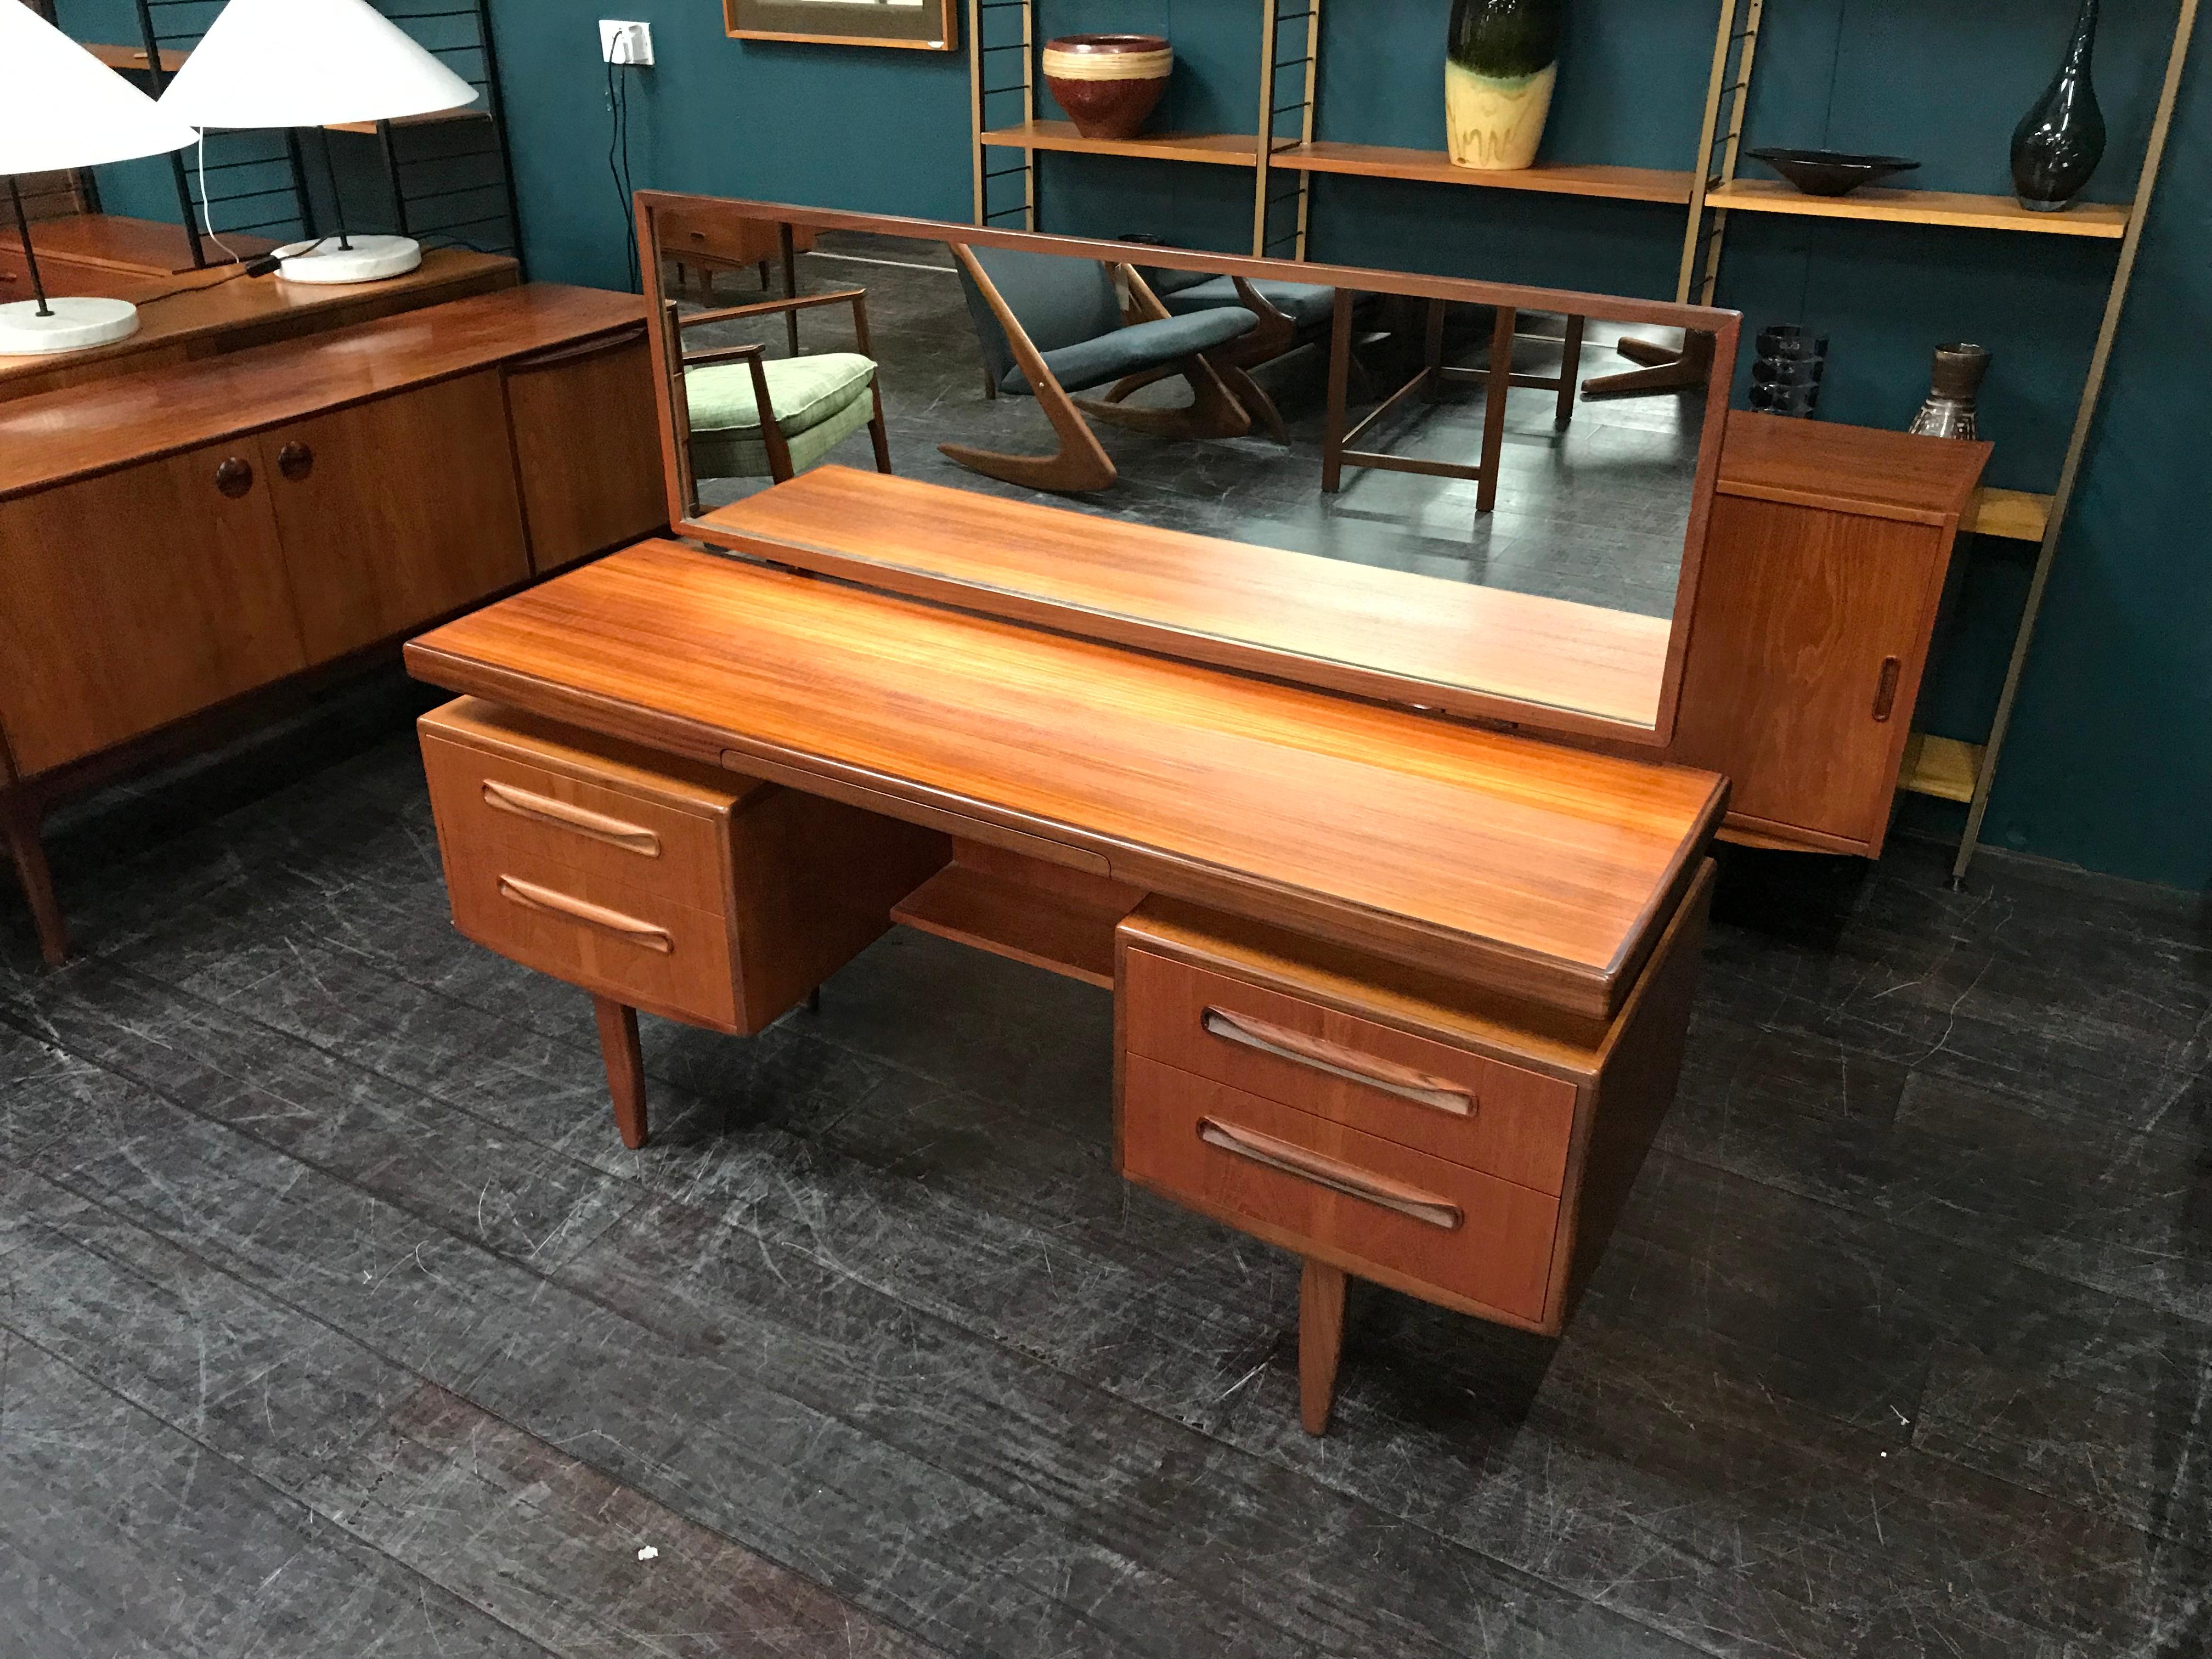 British Midcentury Teak 'Fresco' Dressing Table Vanity by VB Wilkins for G Plan In Good Condition For Sale In Glasgow, GB